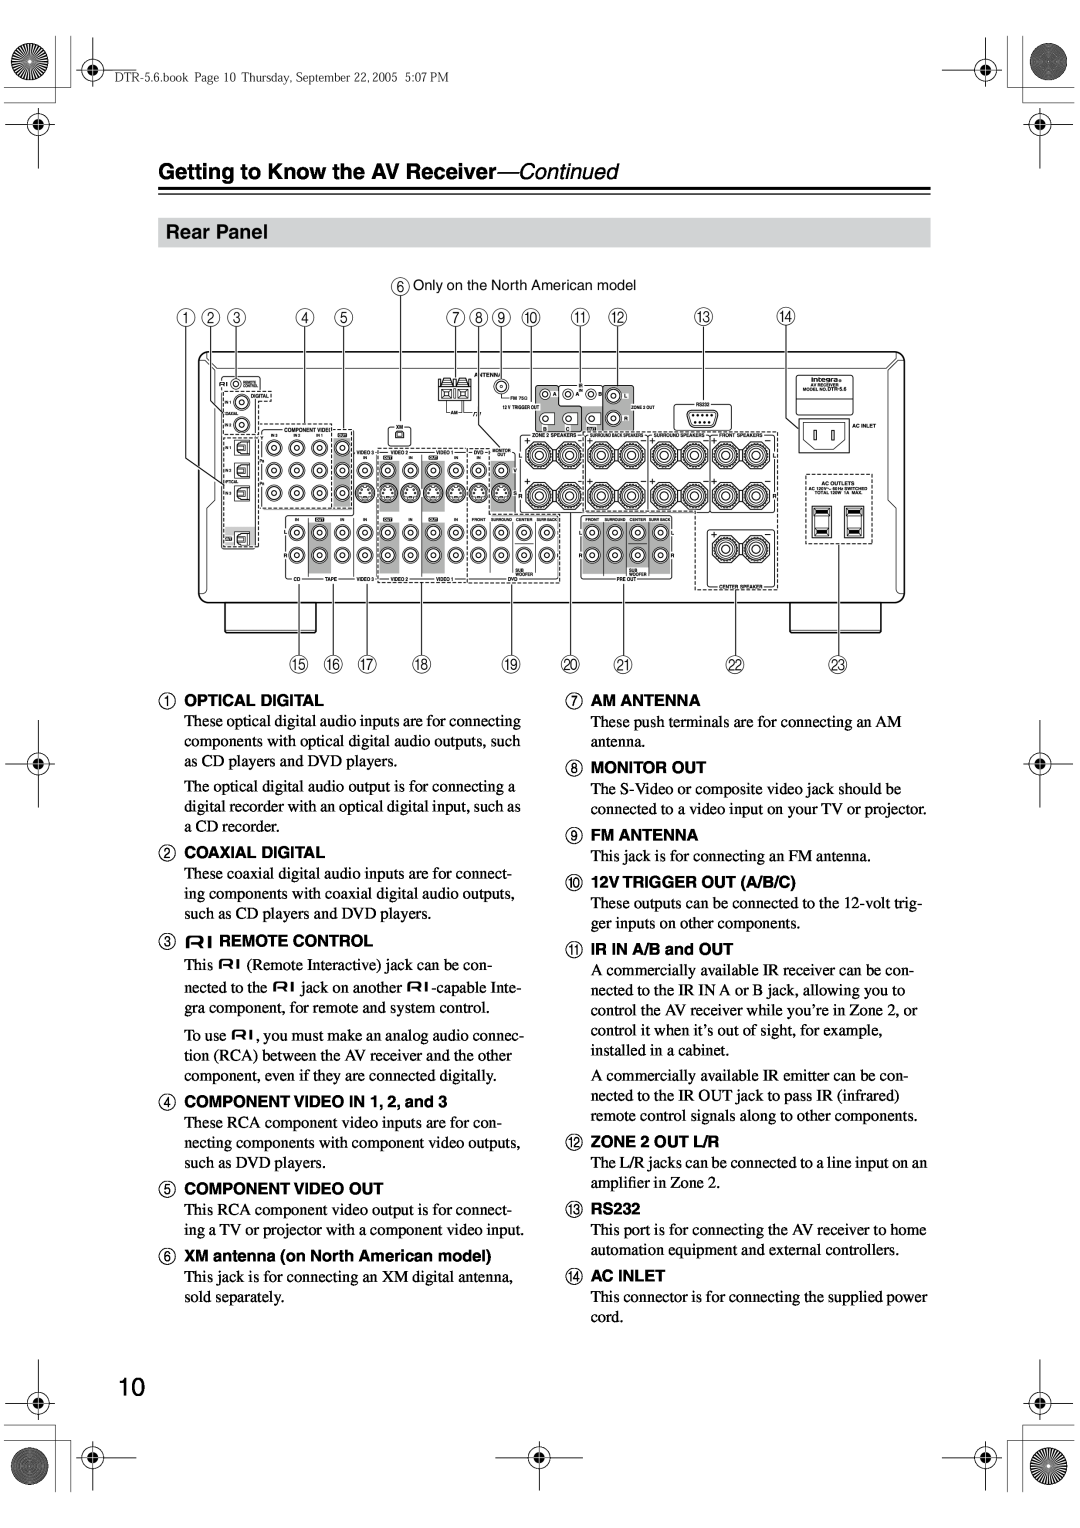 Integra DTR-5.6 instruction manual Rear Panel, Getting to Know the AV Receiver—Continued, J K L, O P Q R S, T U V W 